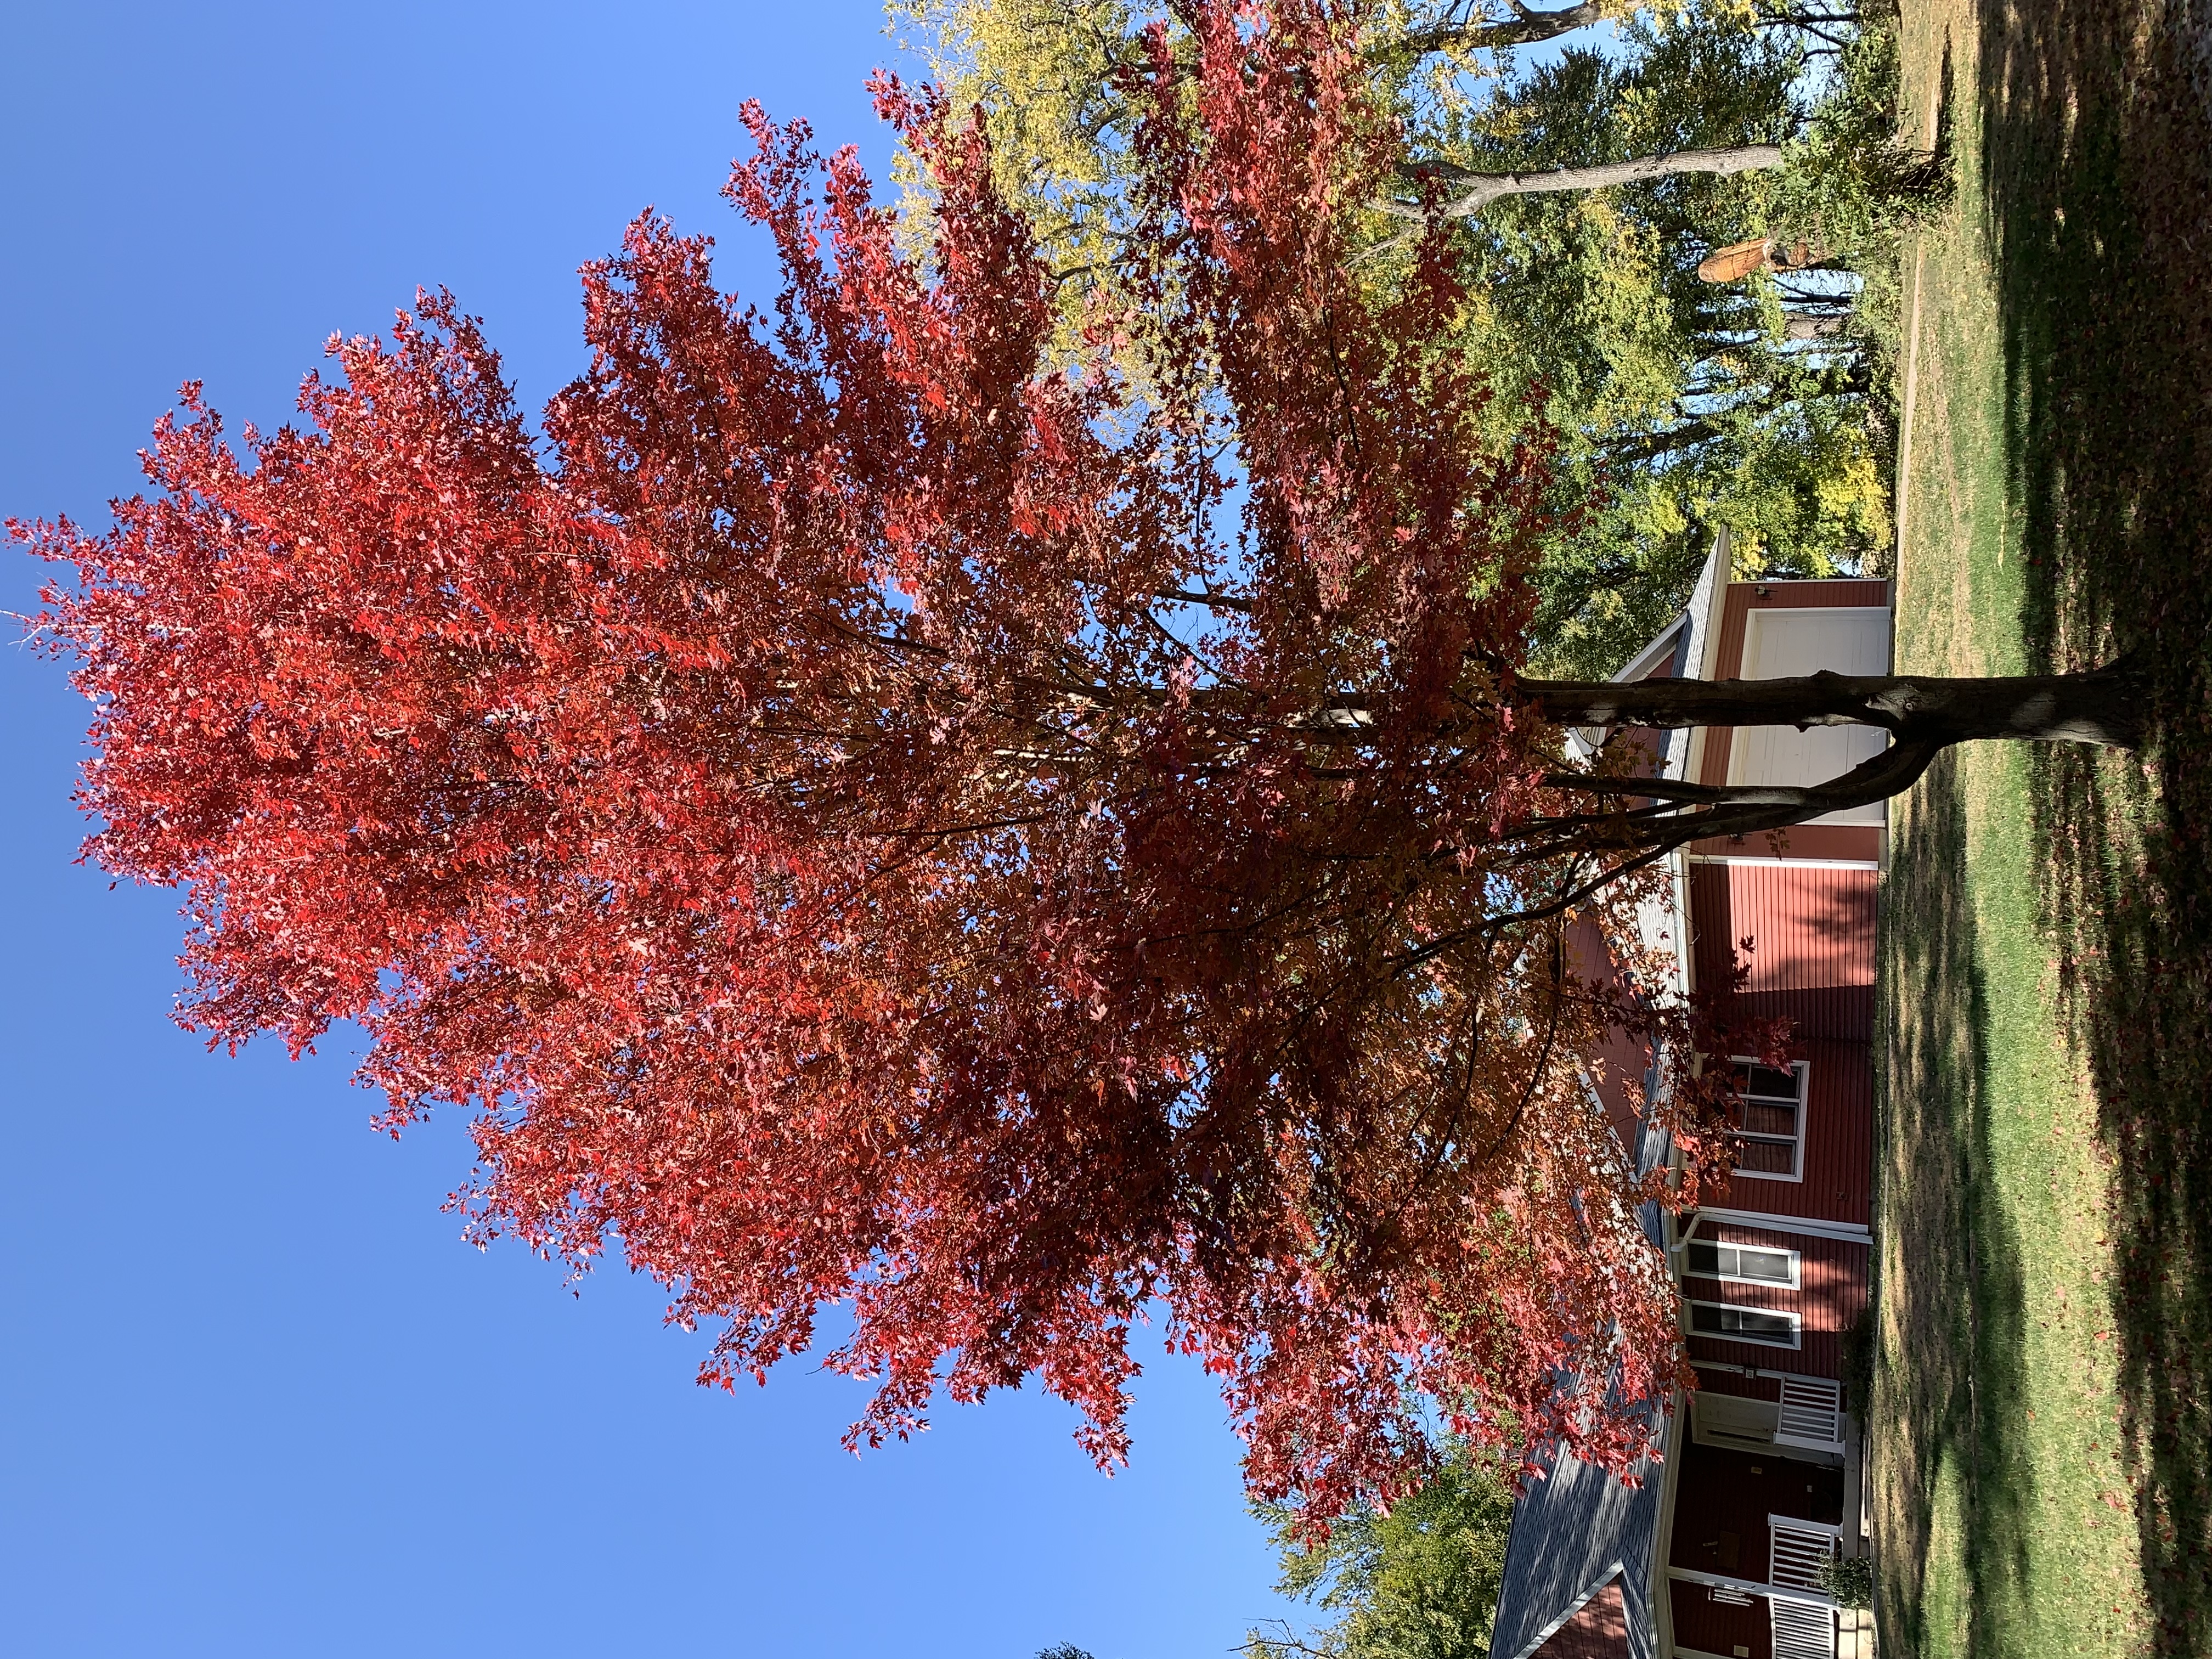 Maple with fire-red leaves stands in a green yard, in front of a red house and against a clear blue sky